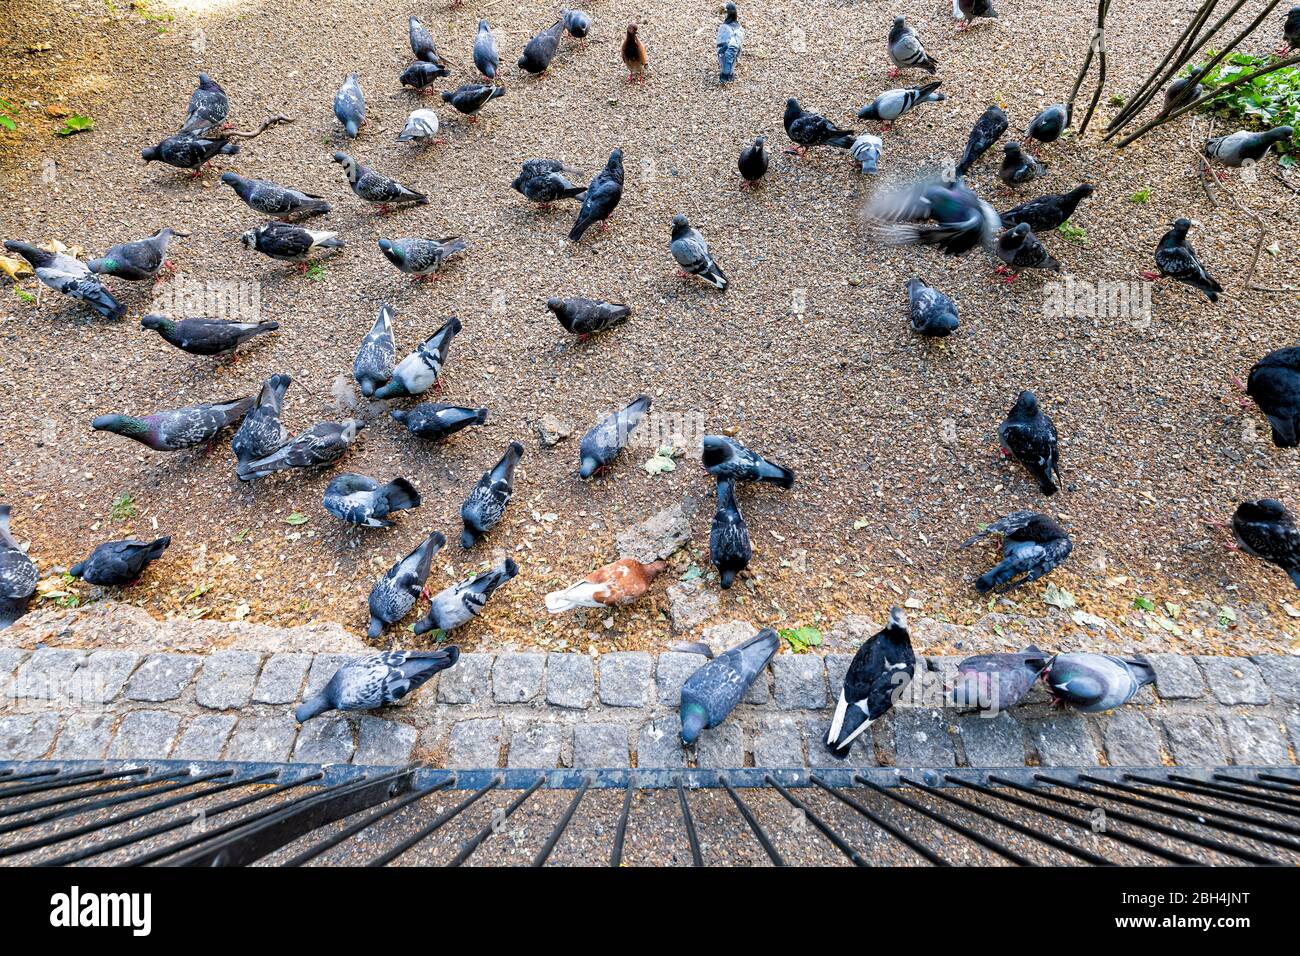 Above high angle view of many pigeon birds by fence in London England UK St James park during day Stock Photo